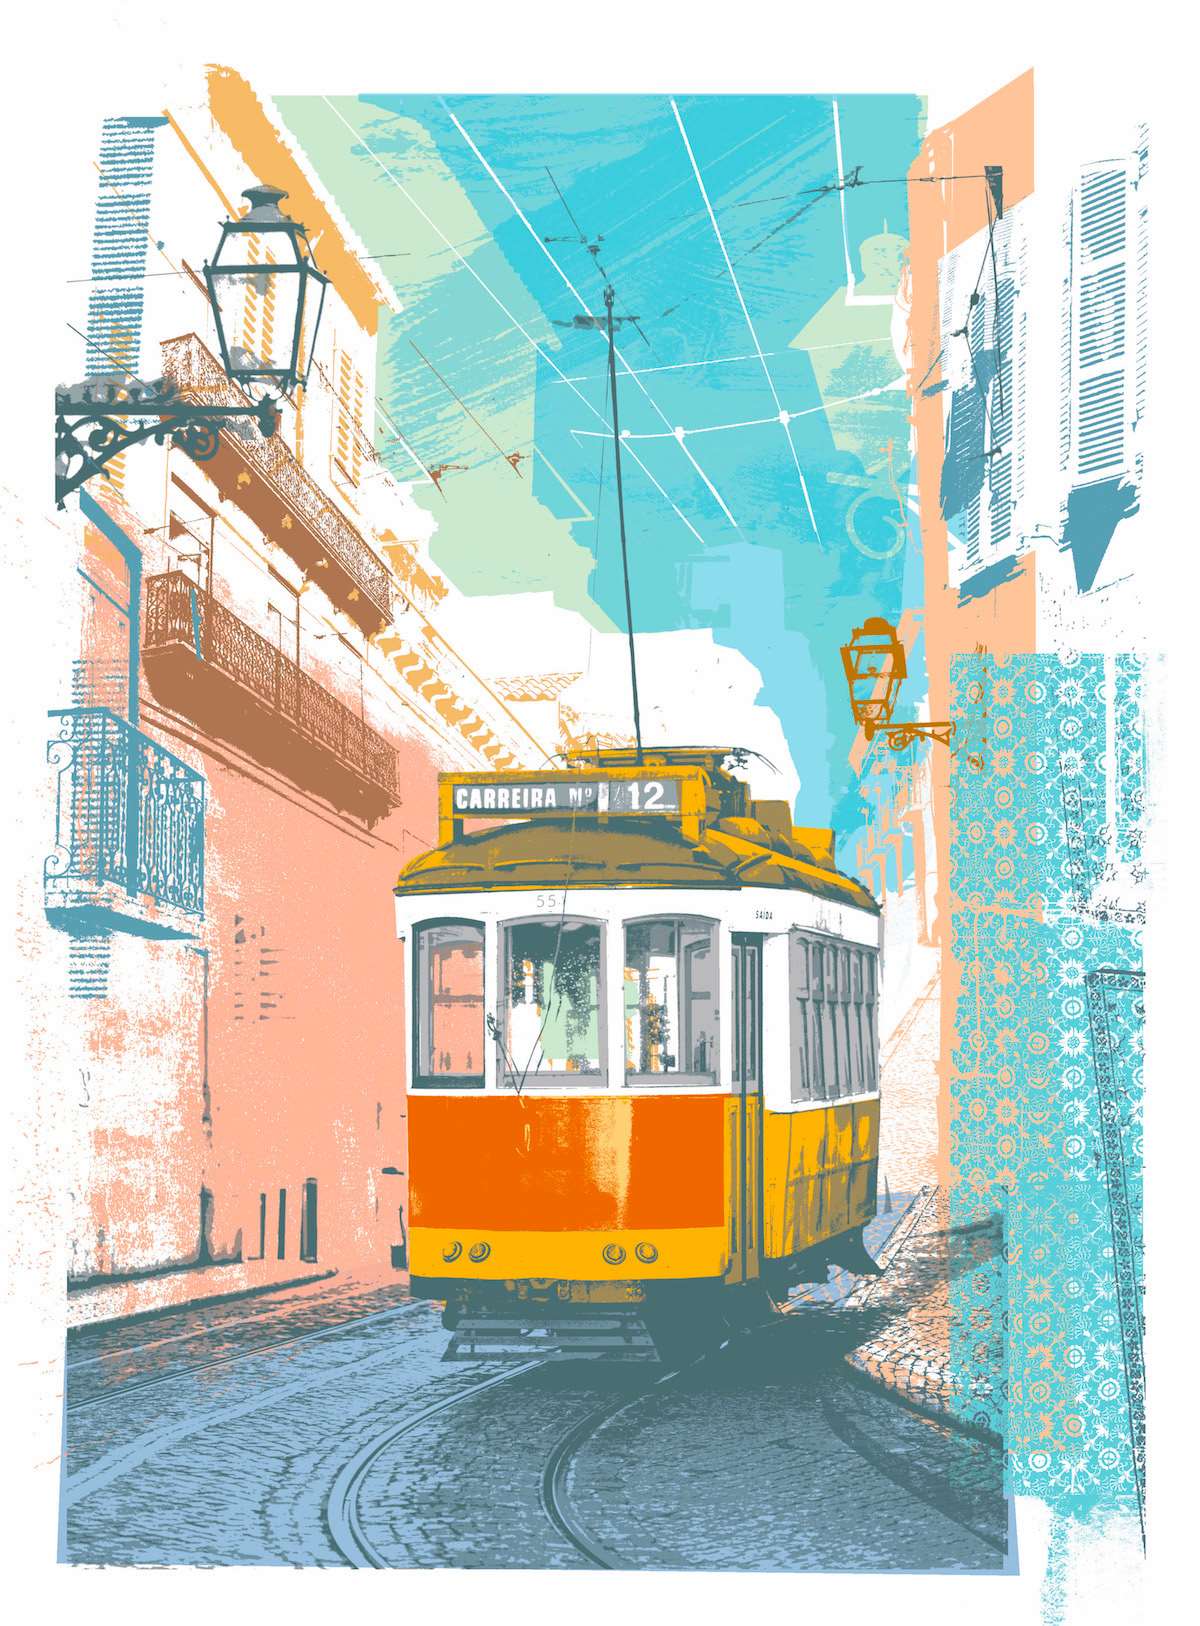 Kate Miller, hand sketch illustration using collage and digital layers. Scene of a tram in Lisbon on a narrow street. 